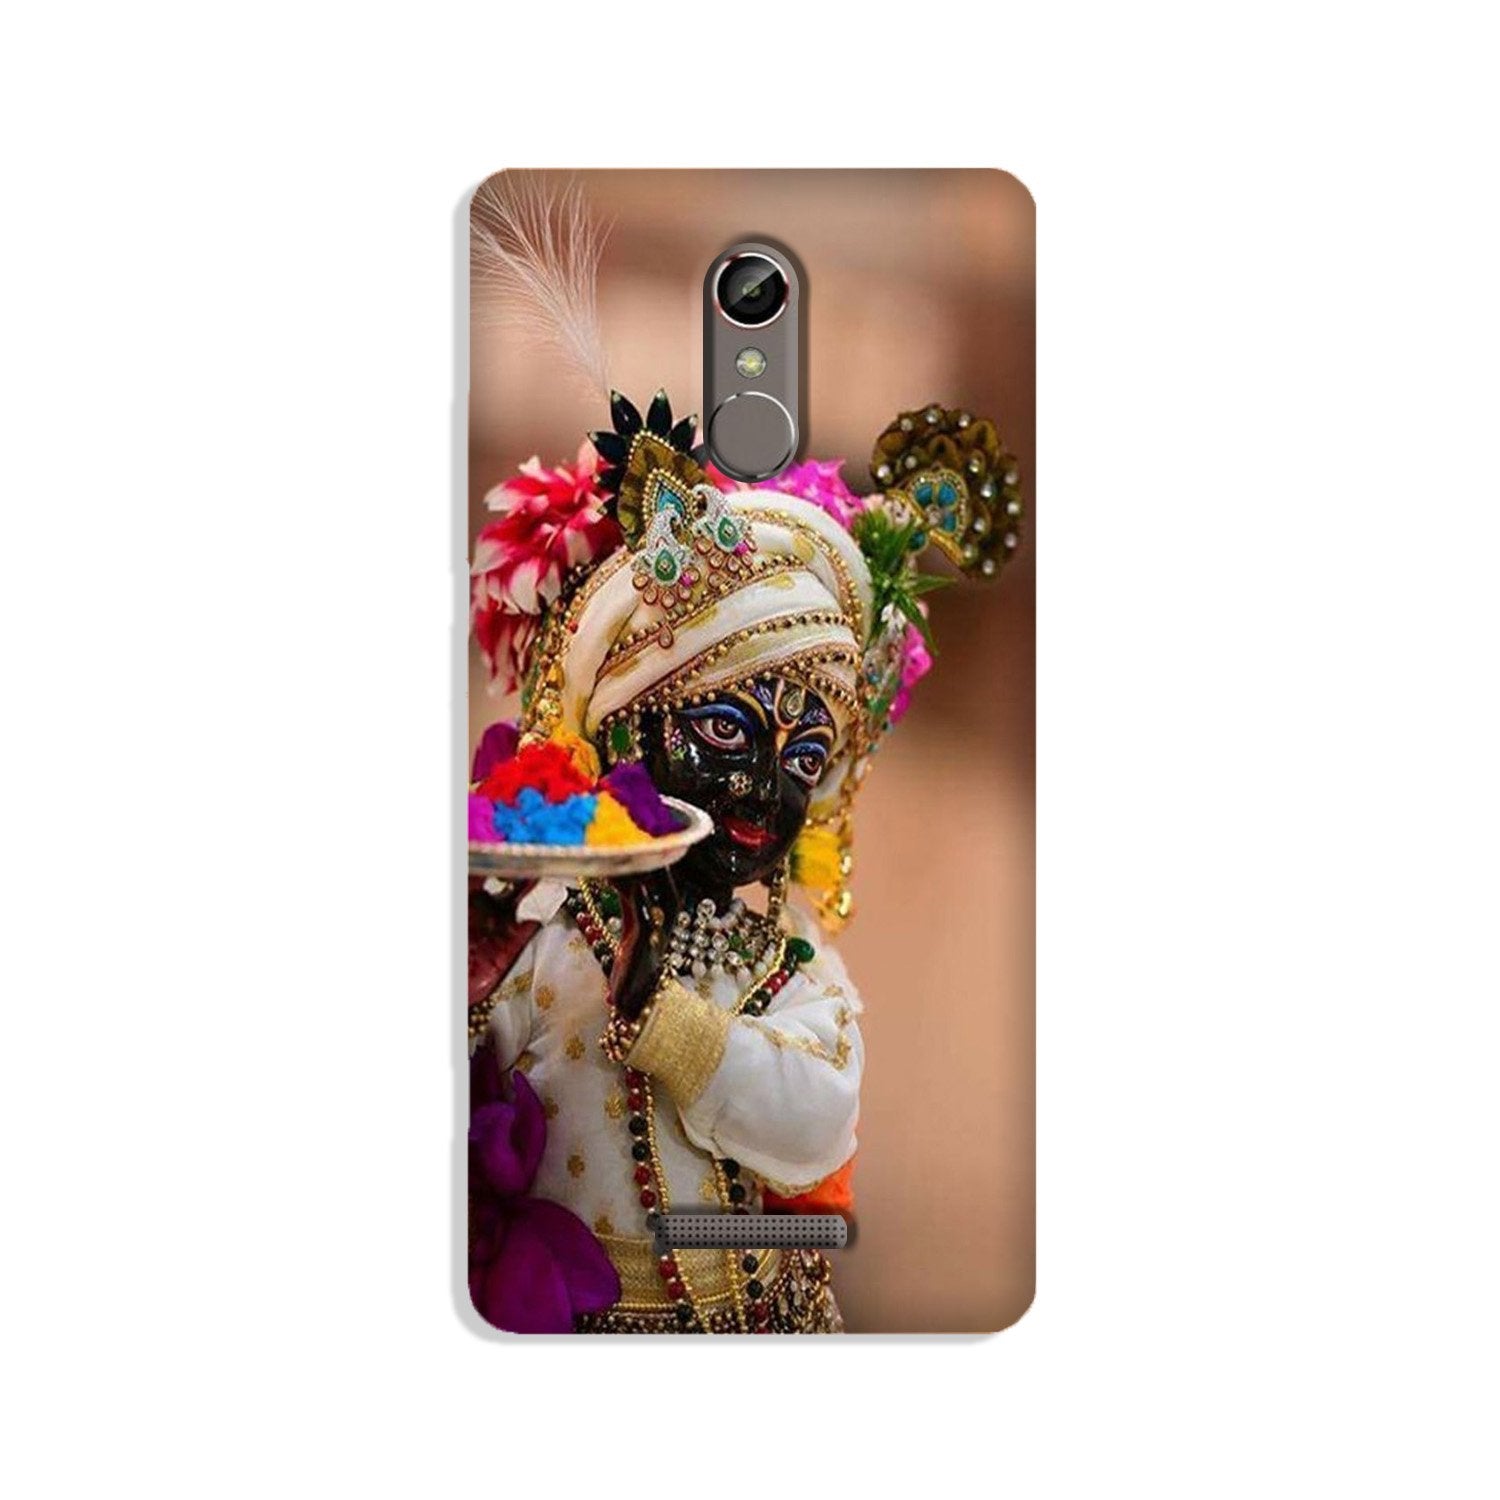 Lord Krishna2 Case for Gionee S6s